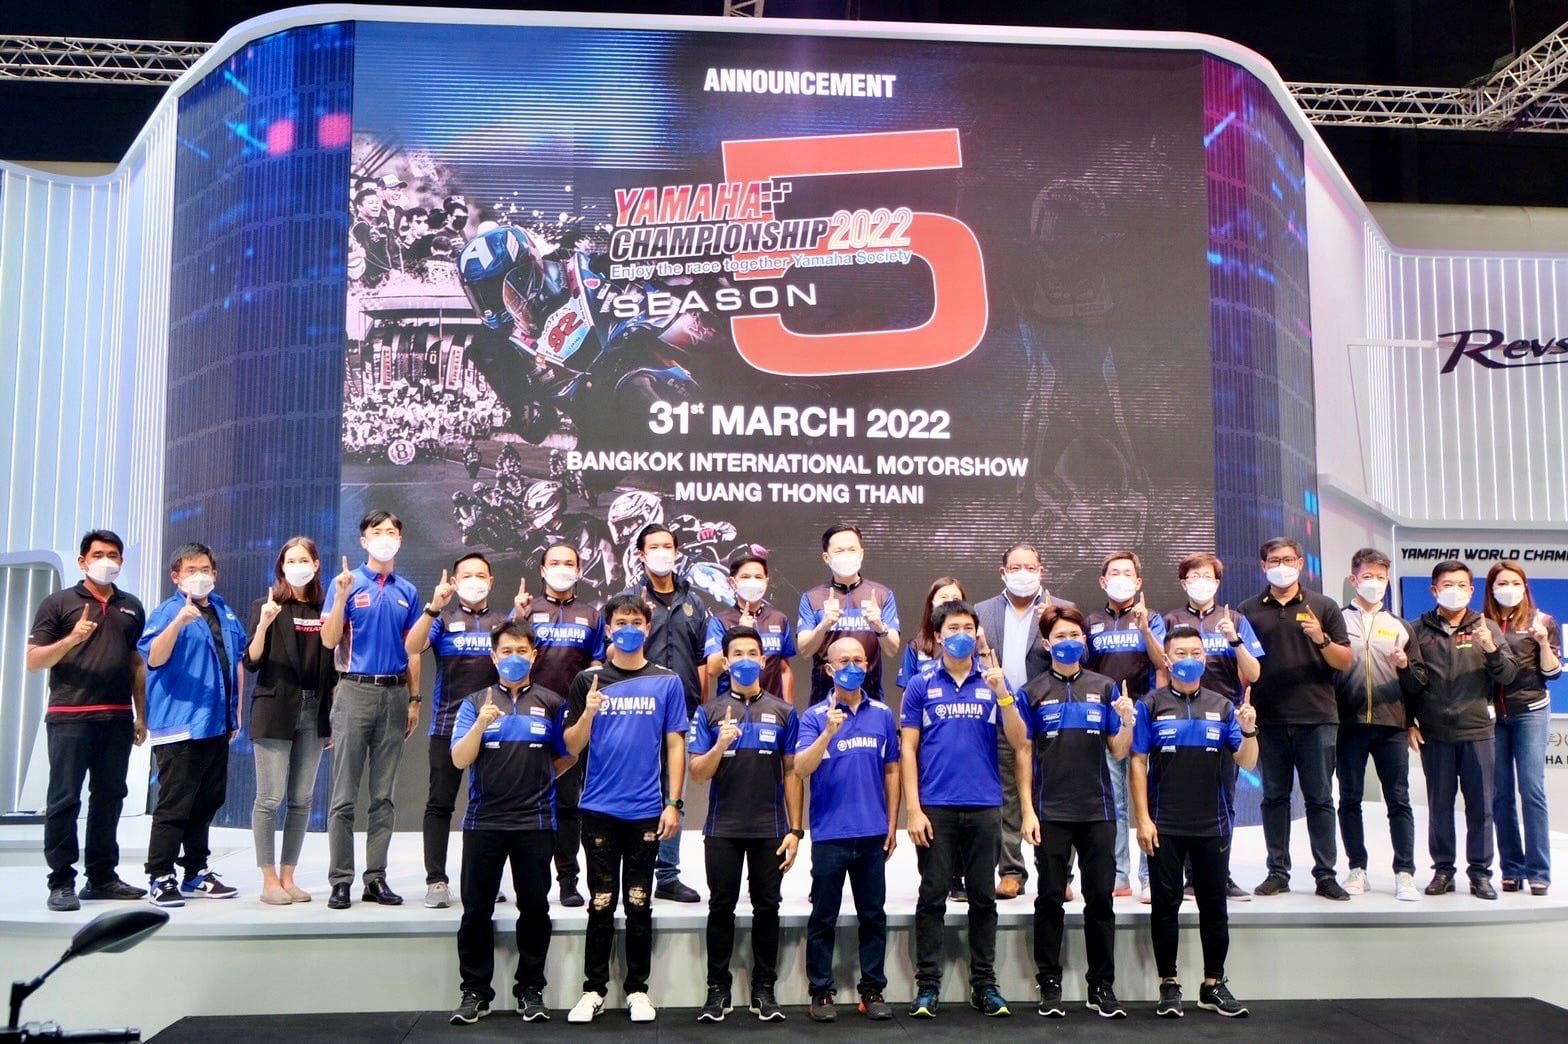 IRC attended the Yamaha Championship 2022 press conference